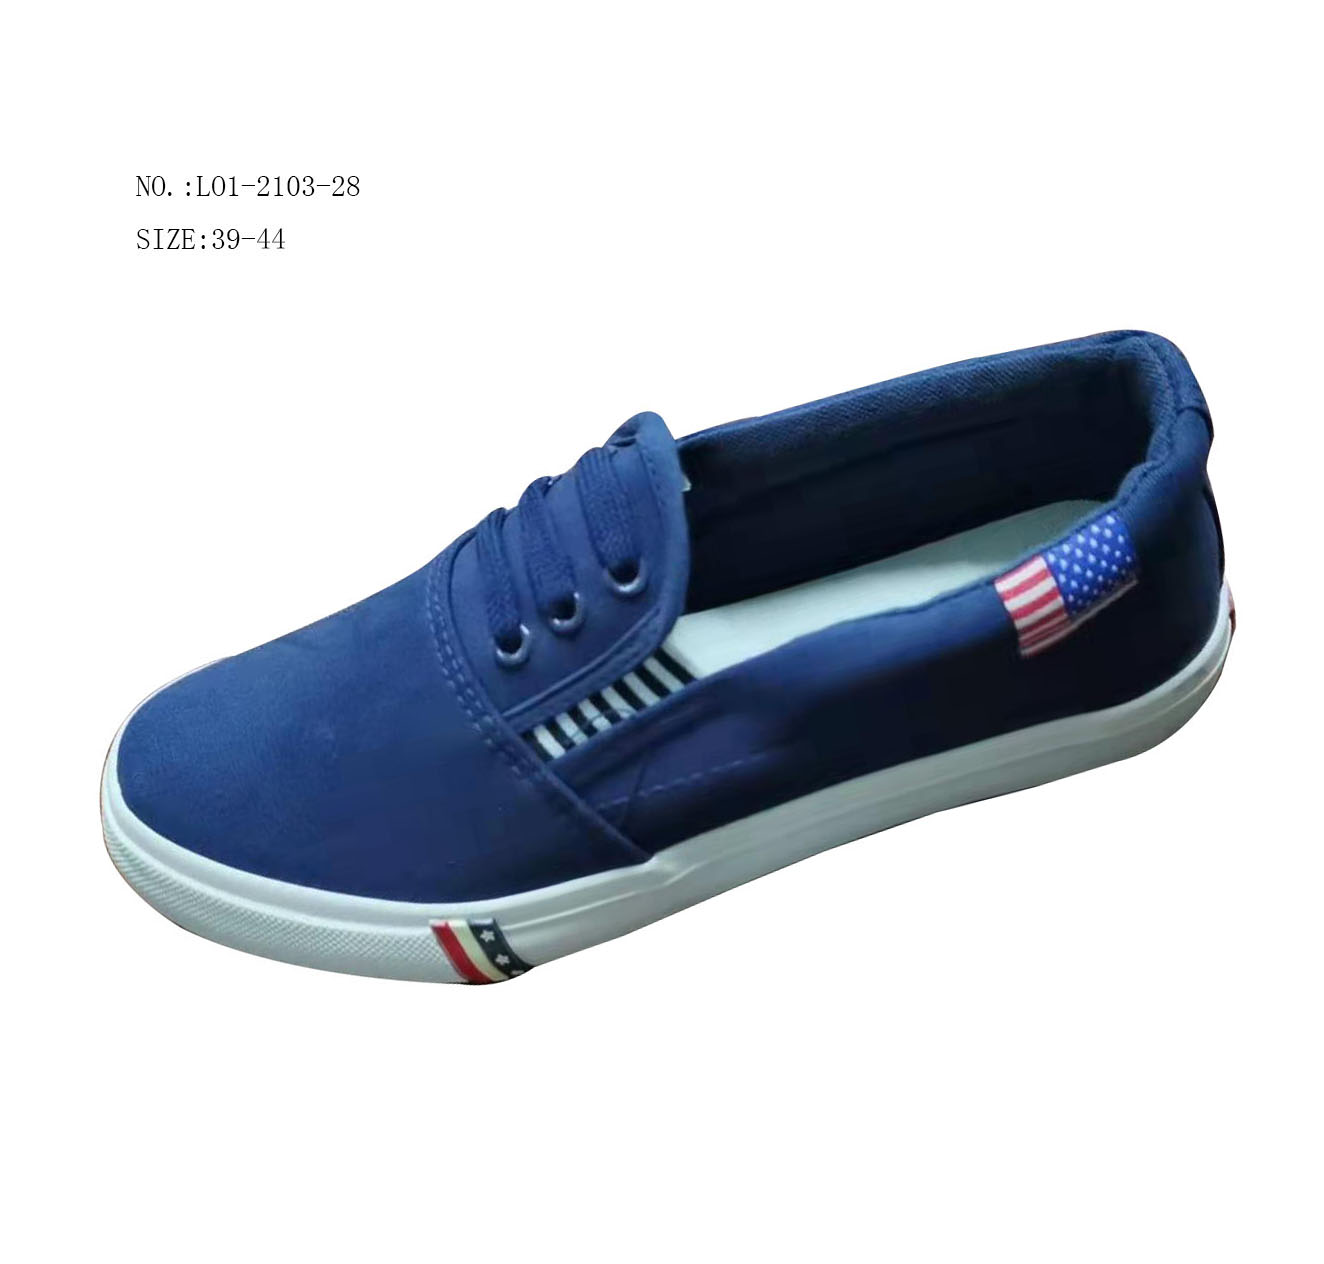 Classic style womenfashion vulcanized students shoes casual canva...